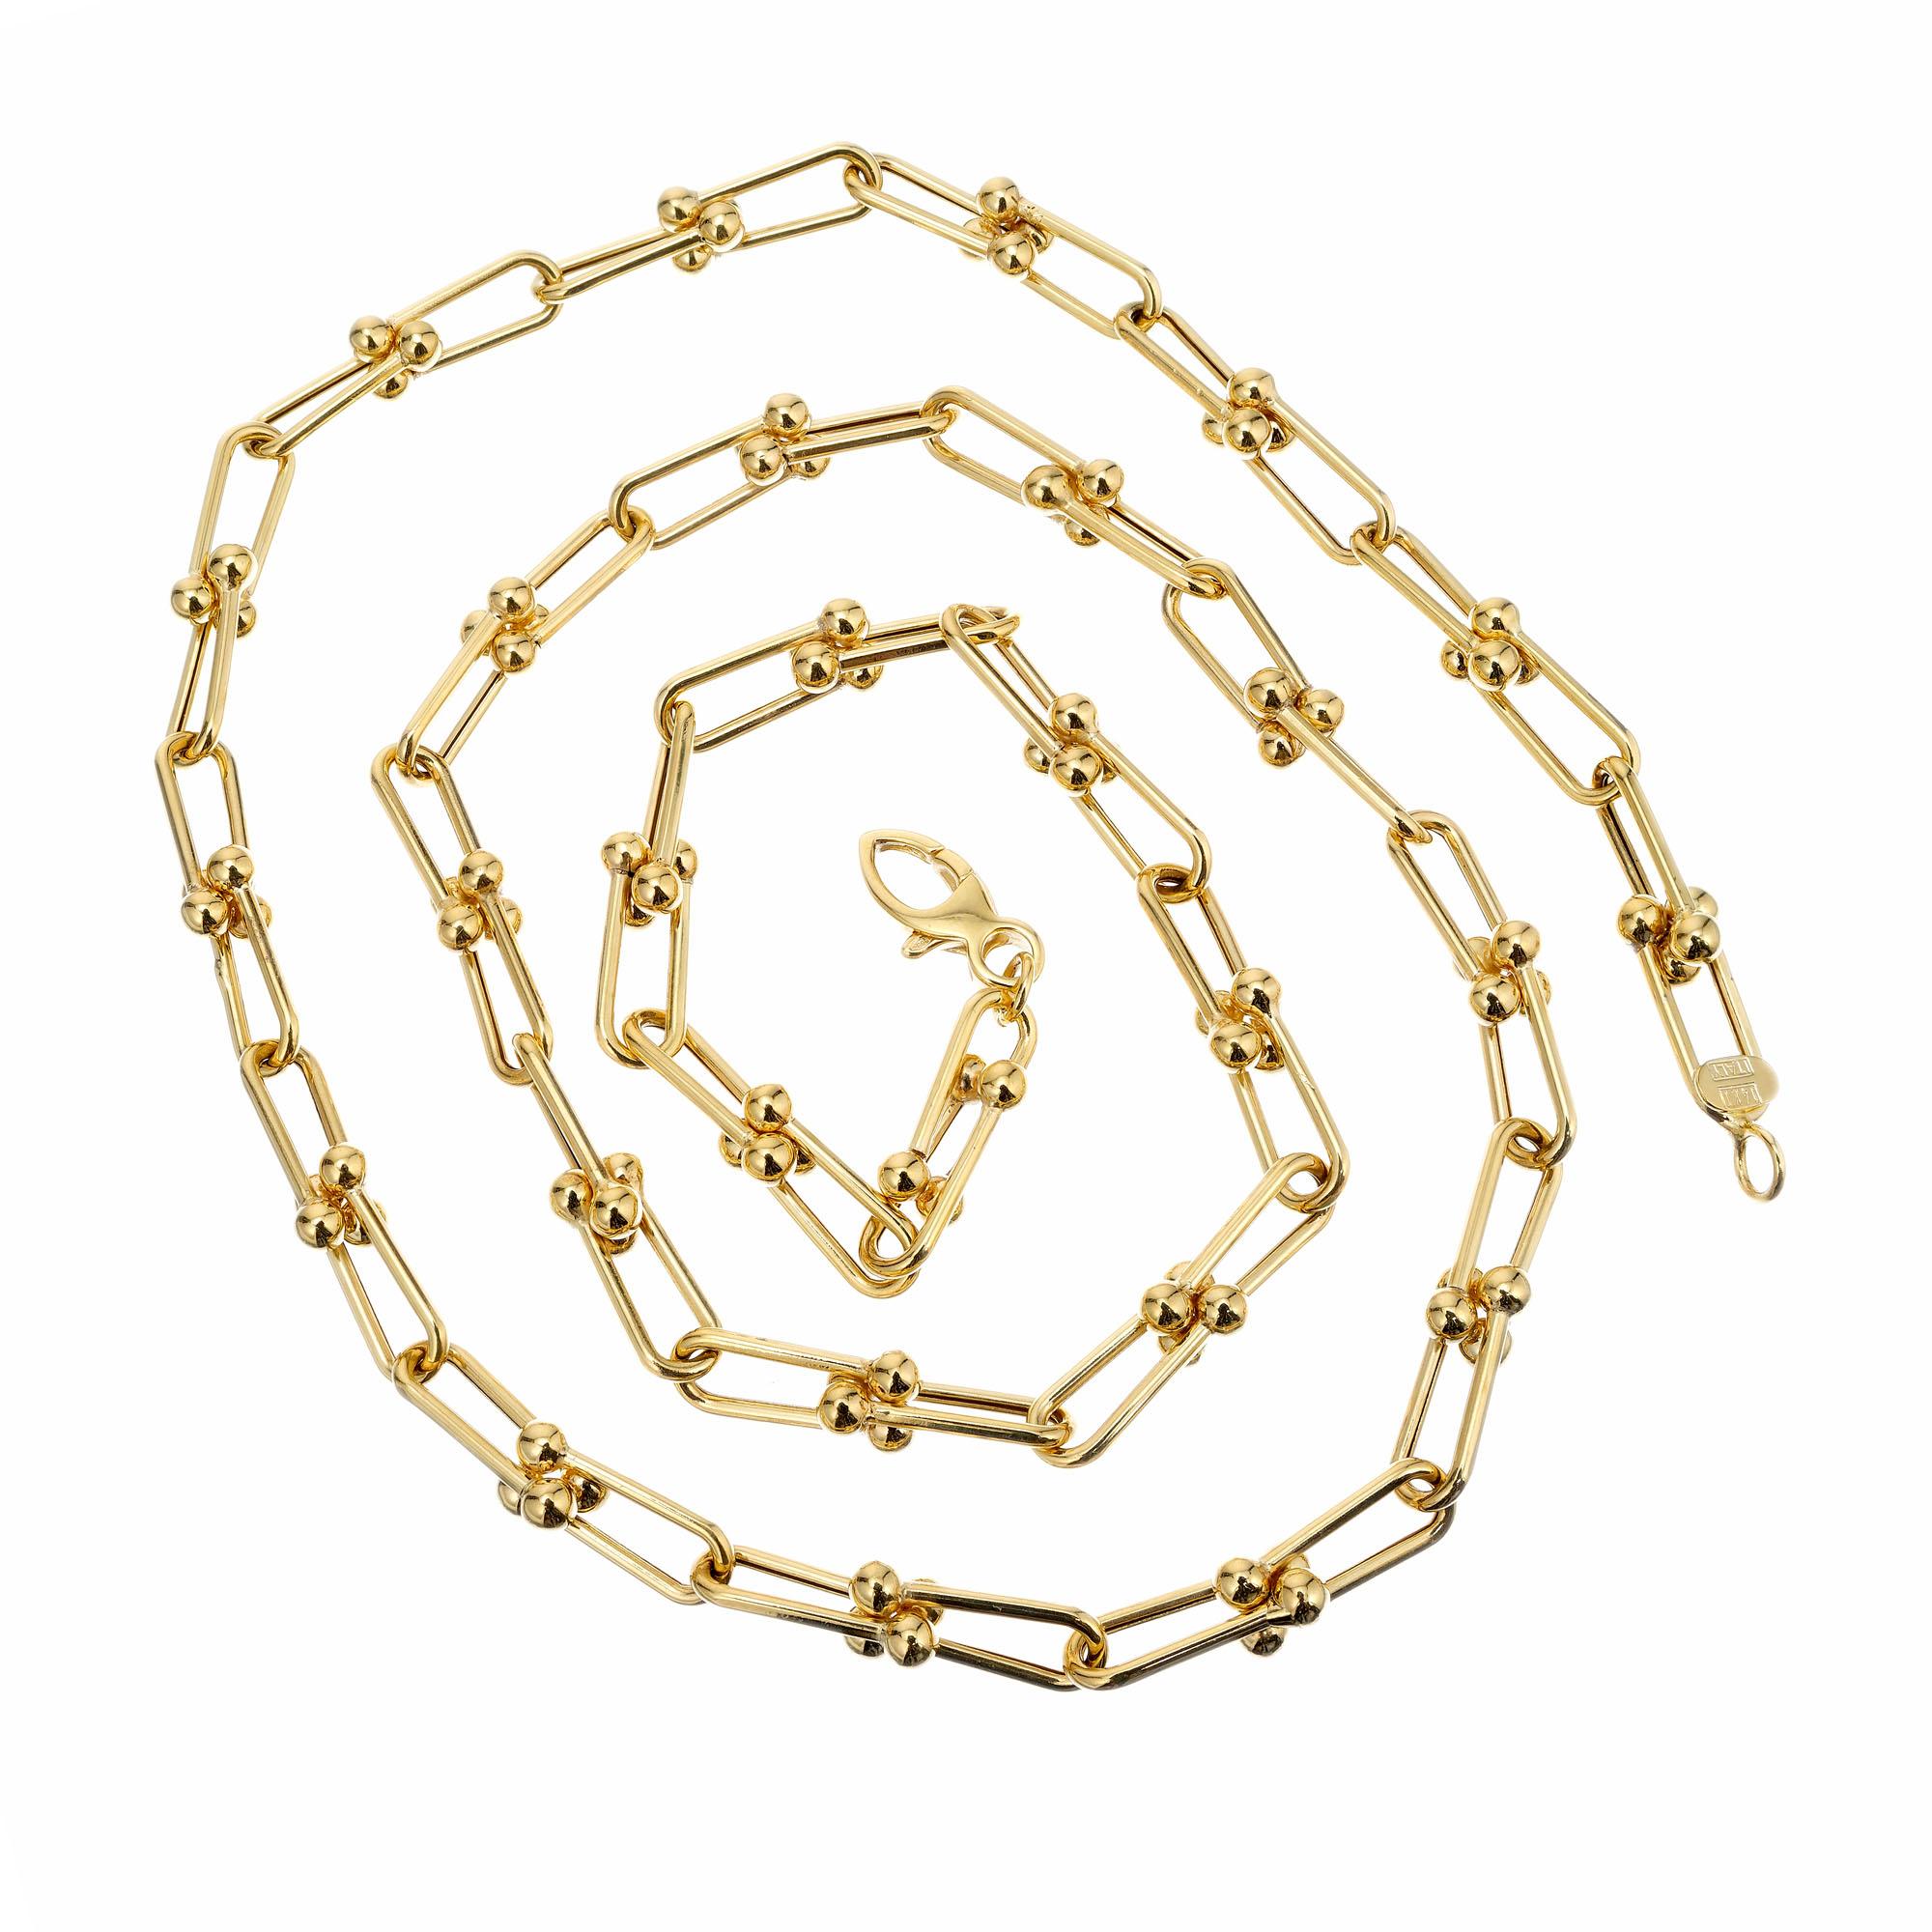 Open oval 14k yellow gold link long chain, with gold ball ends. Made in Italy.

14k yellow gold 
Stamped: 14k Italy 
17.1 grams
Total length: 24 Inches
Width: 5.4- 6.1mm 
Thickness/depth: 1.3mm
